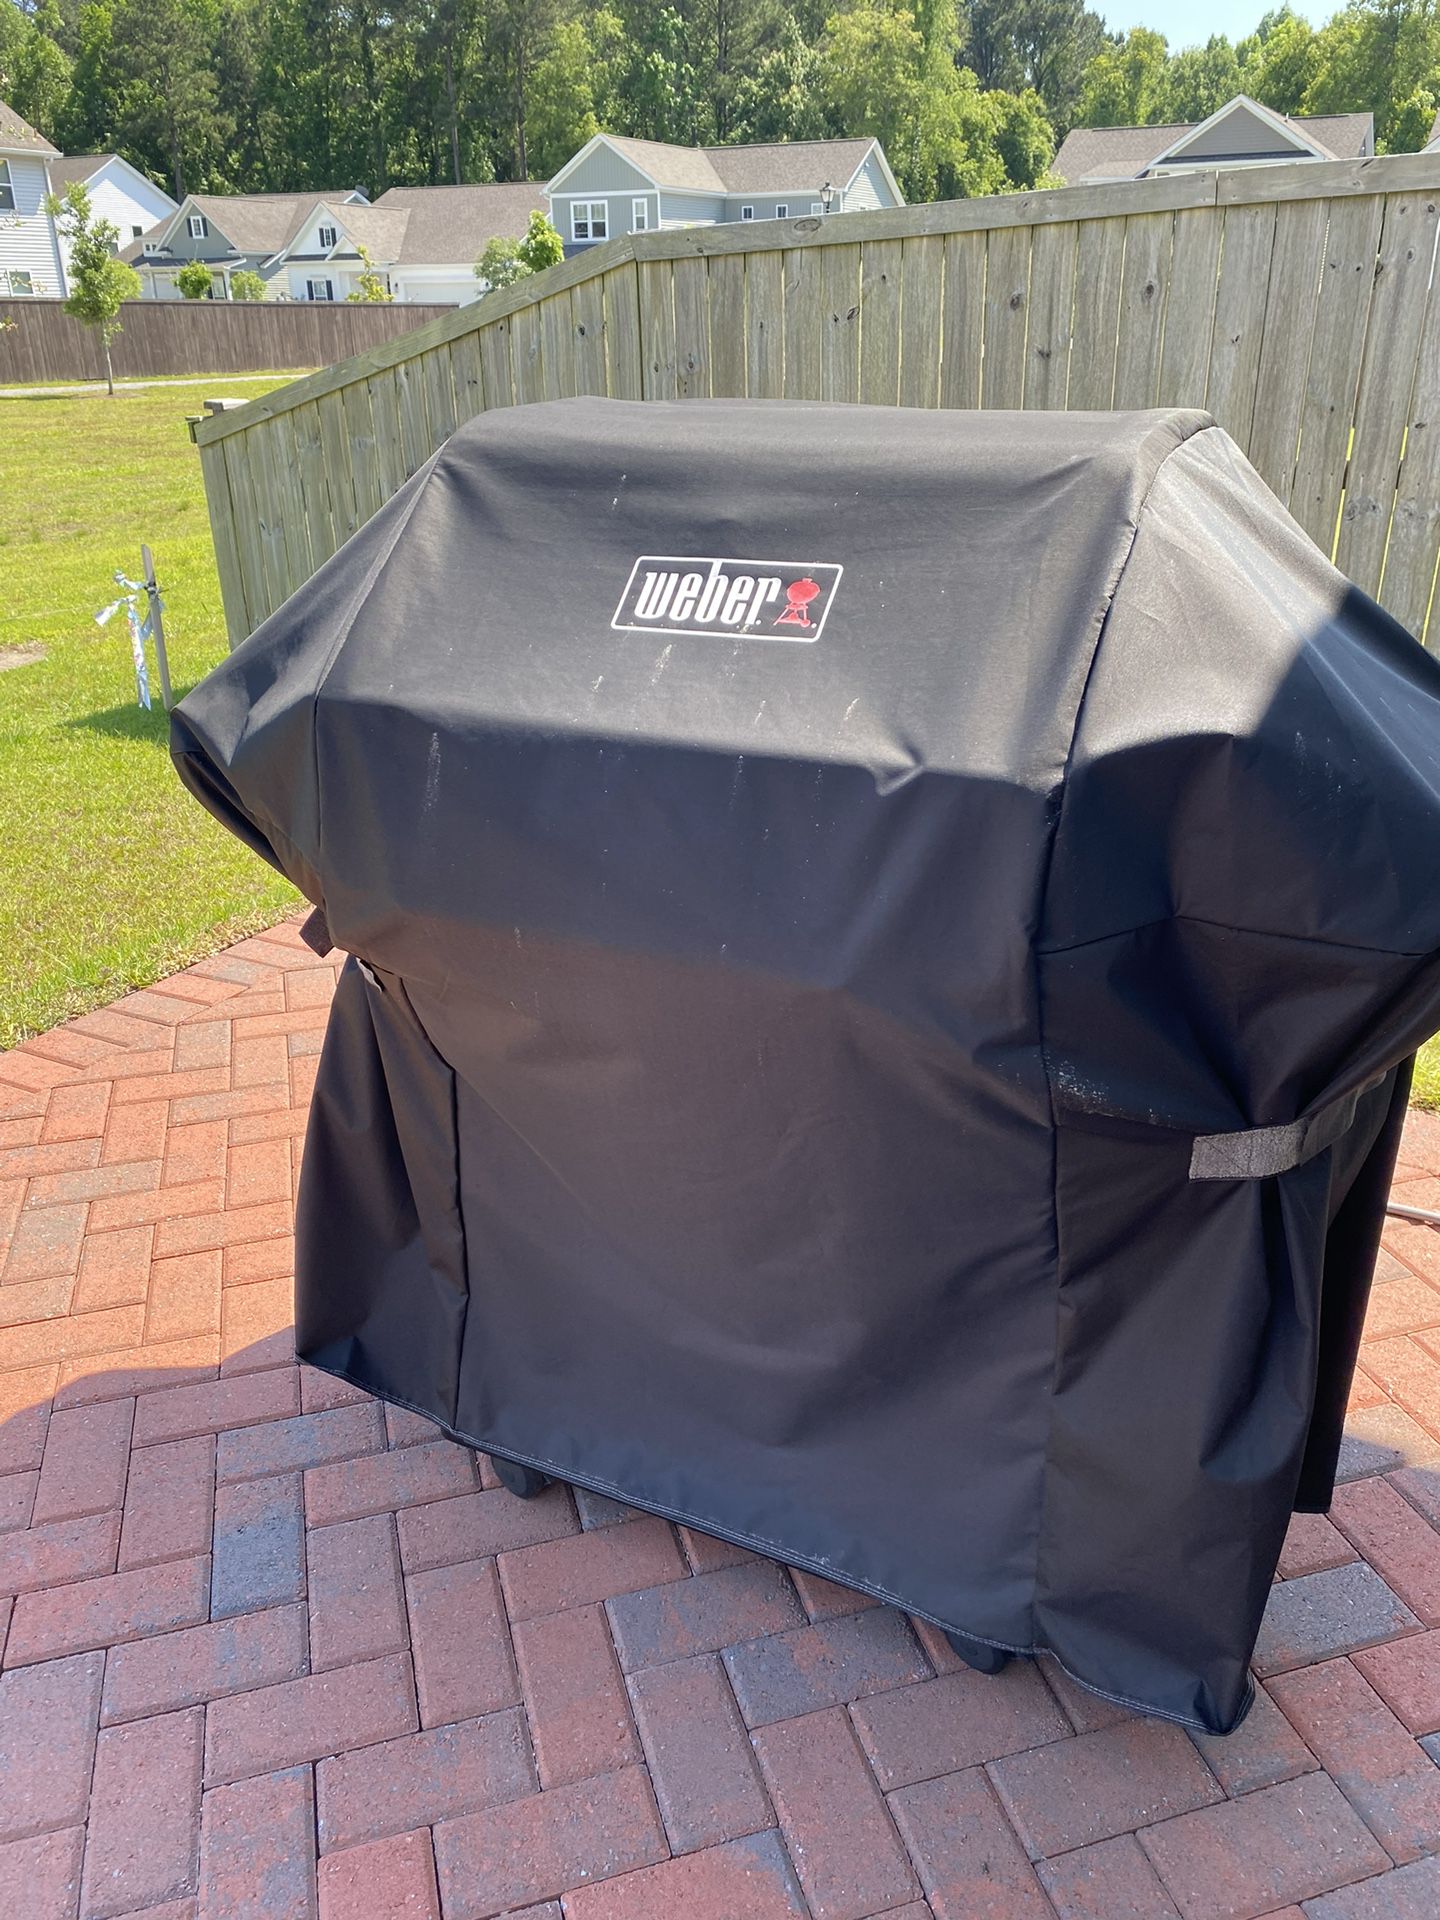 Weber Grill With Cover